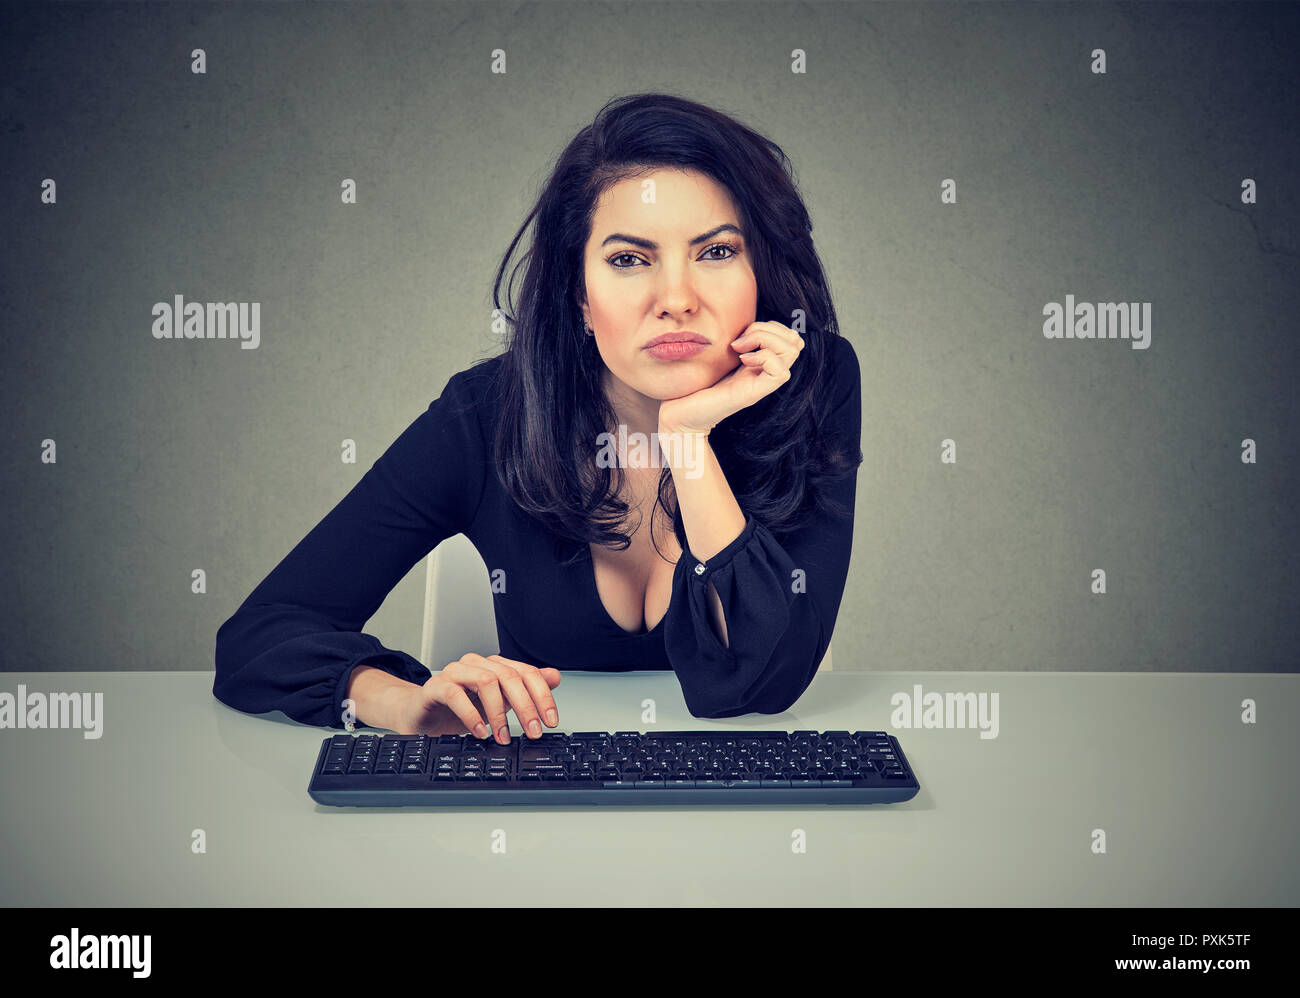 Young woman sitting at workplace and procrastinating being lazy and distracted feeling bored Stock Photo